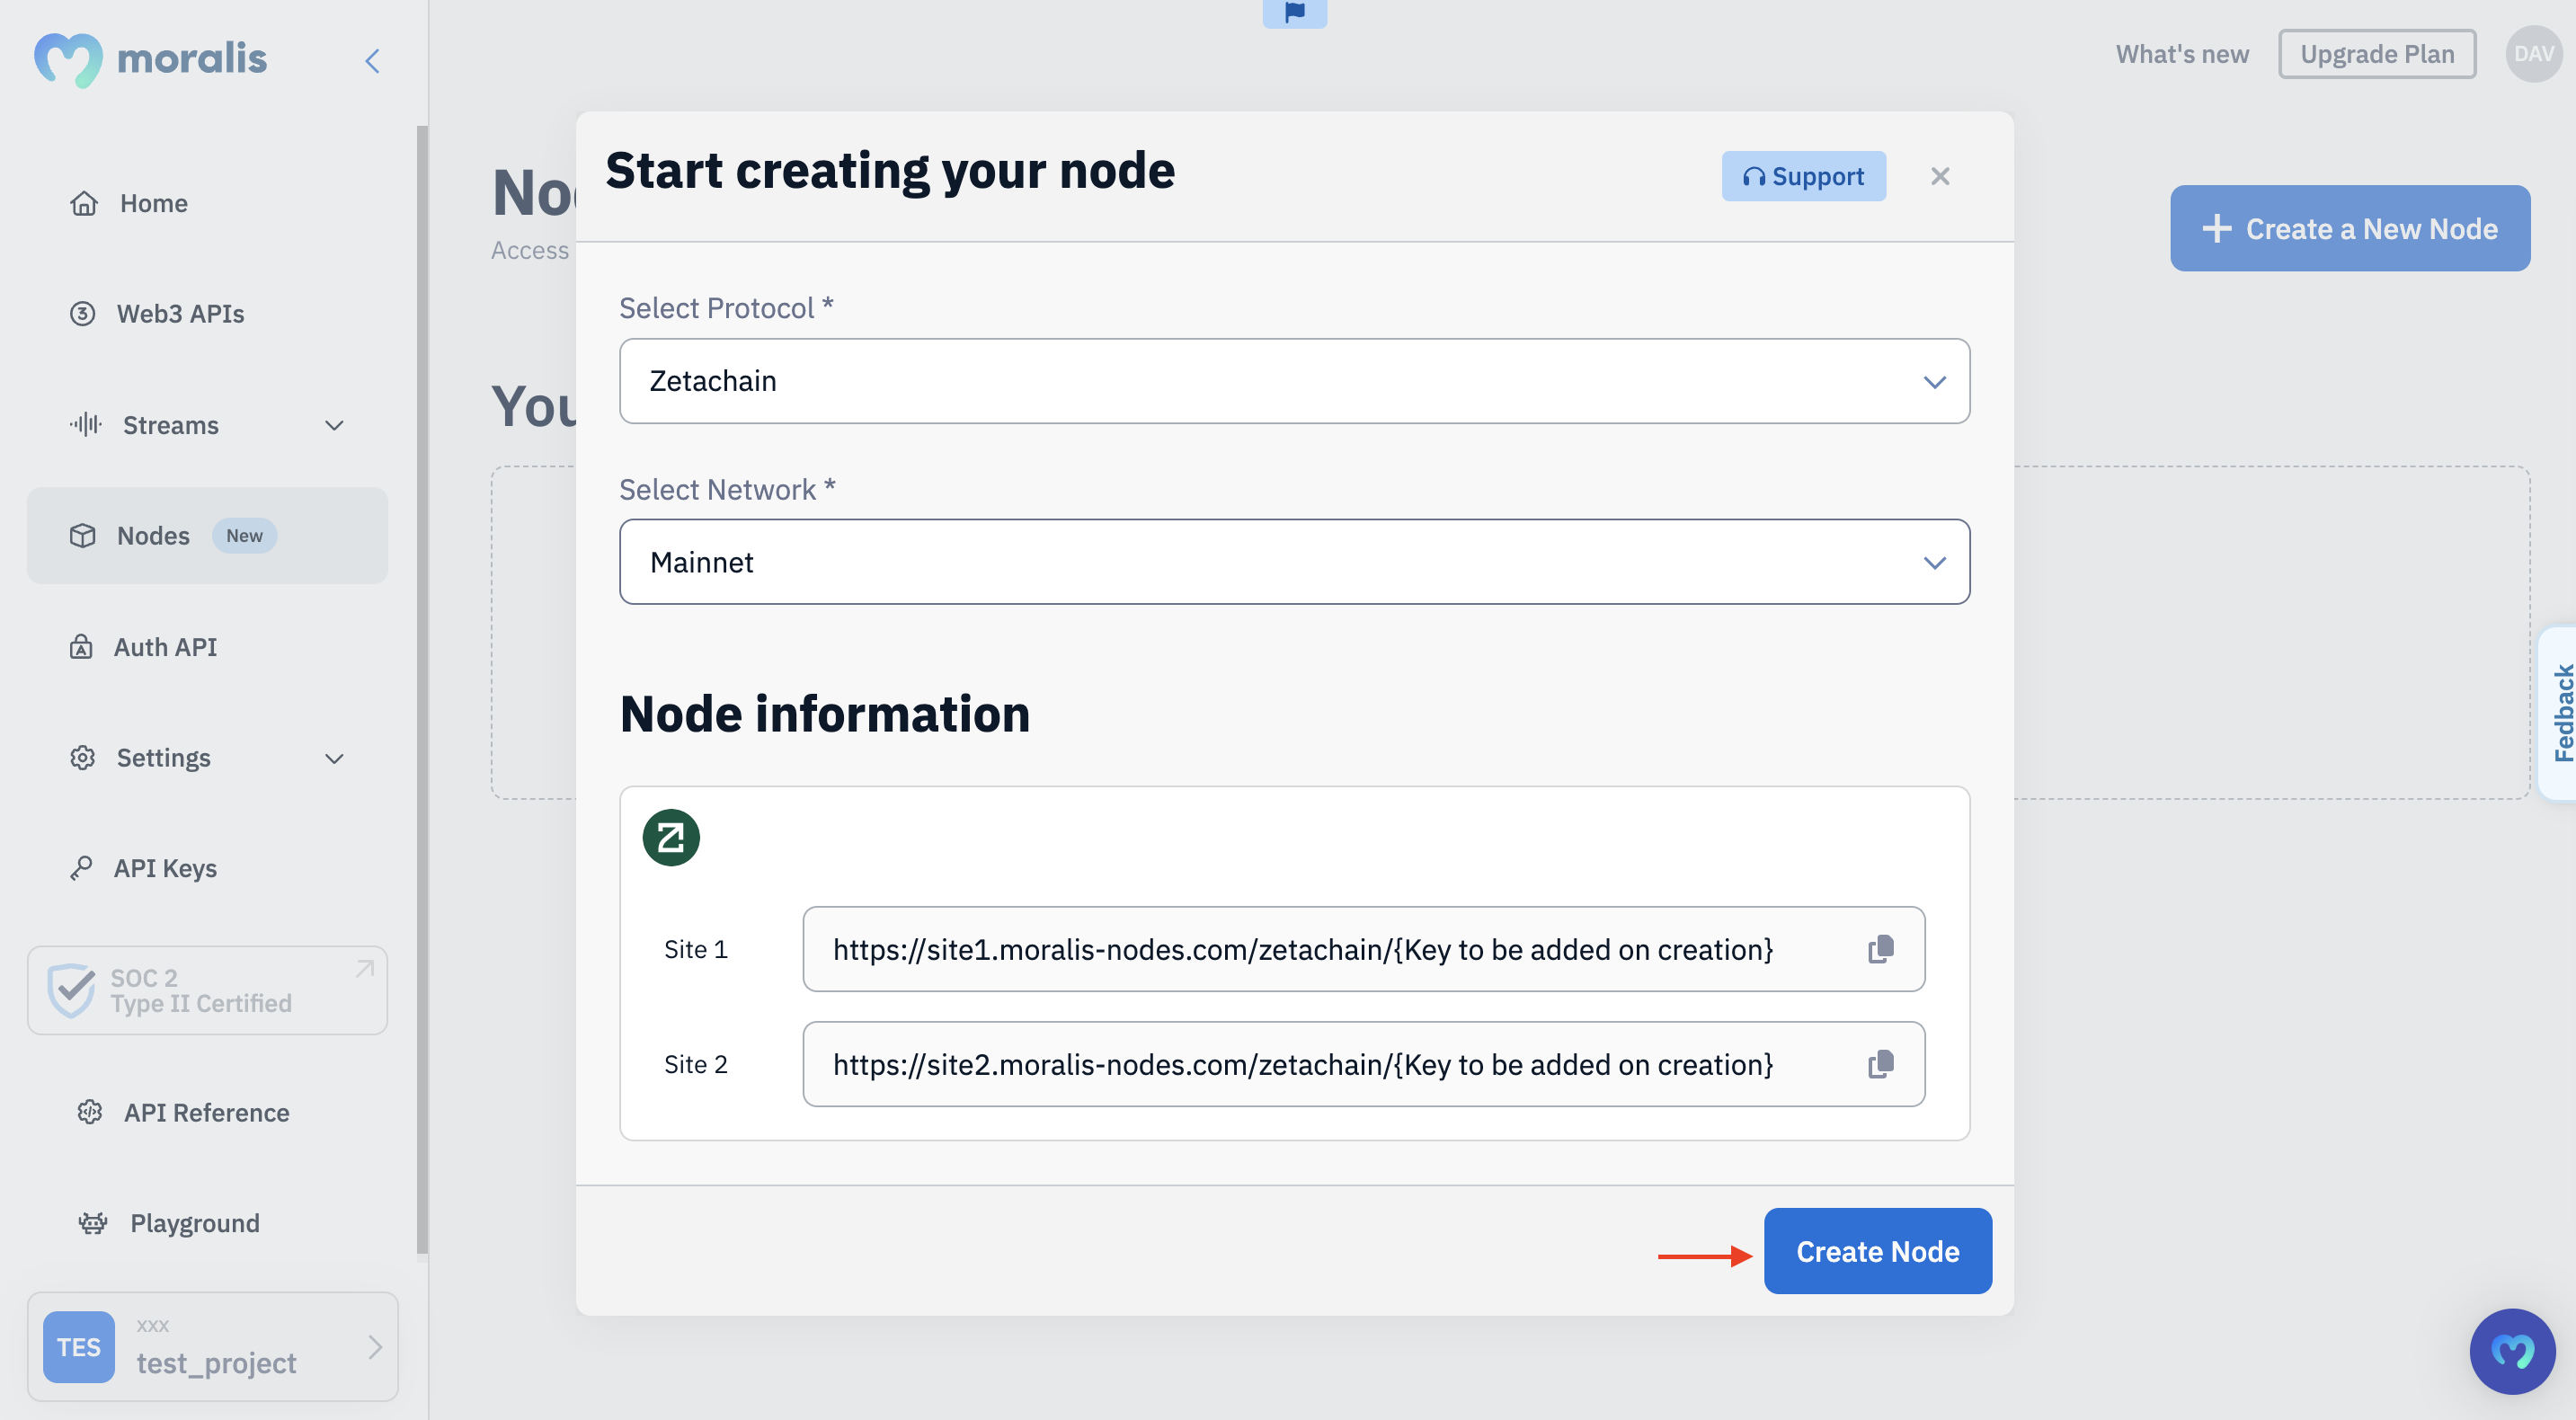 Red arrow pointing at "Create Node" button during node configuration.